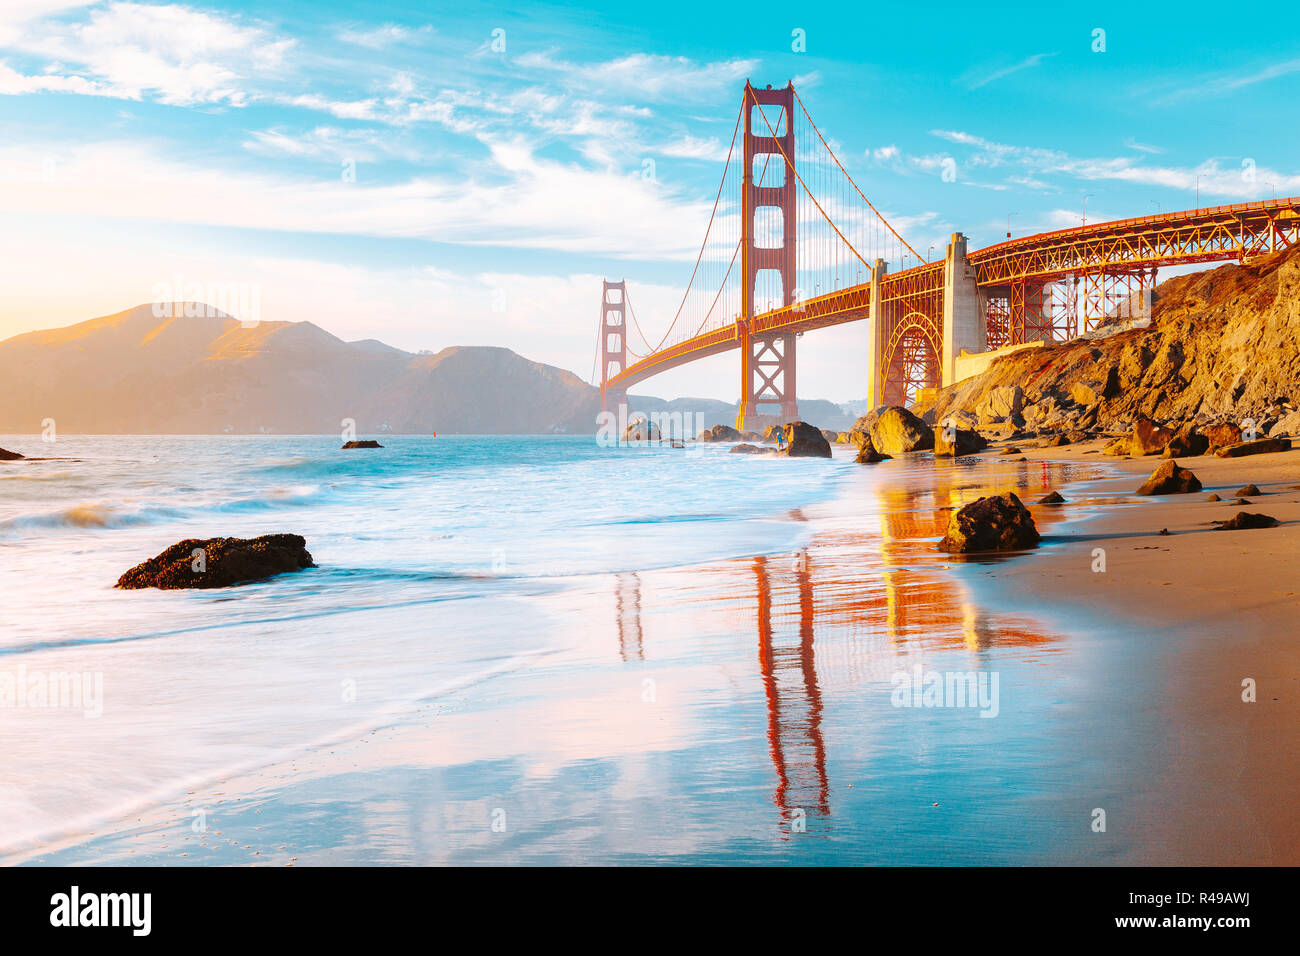 Famous Golden Gate Bridge seen from scenic Baker Beach in beautiful golden evening light on a sunny day with blue sky and clouds, San Francisco, USA Stock Photo